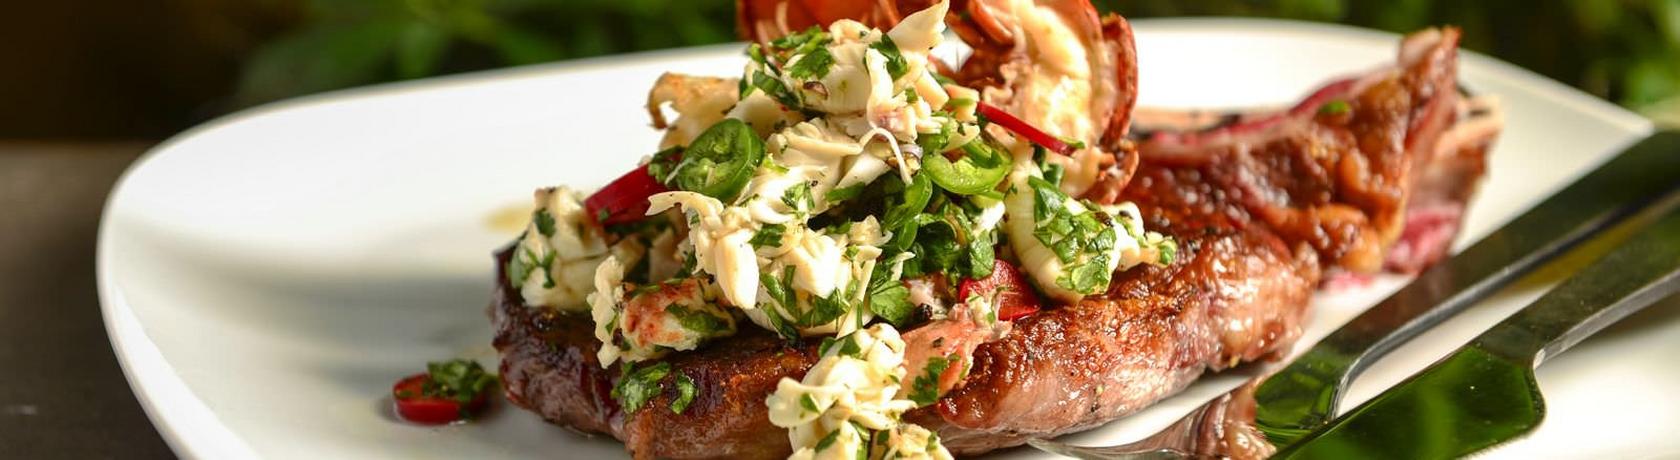 image of Sweetheart Steak with Lobster Ceviche